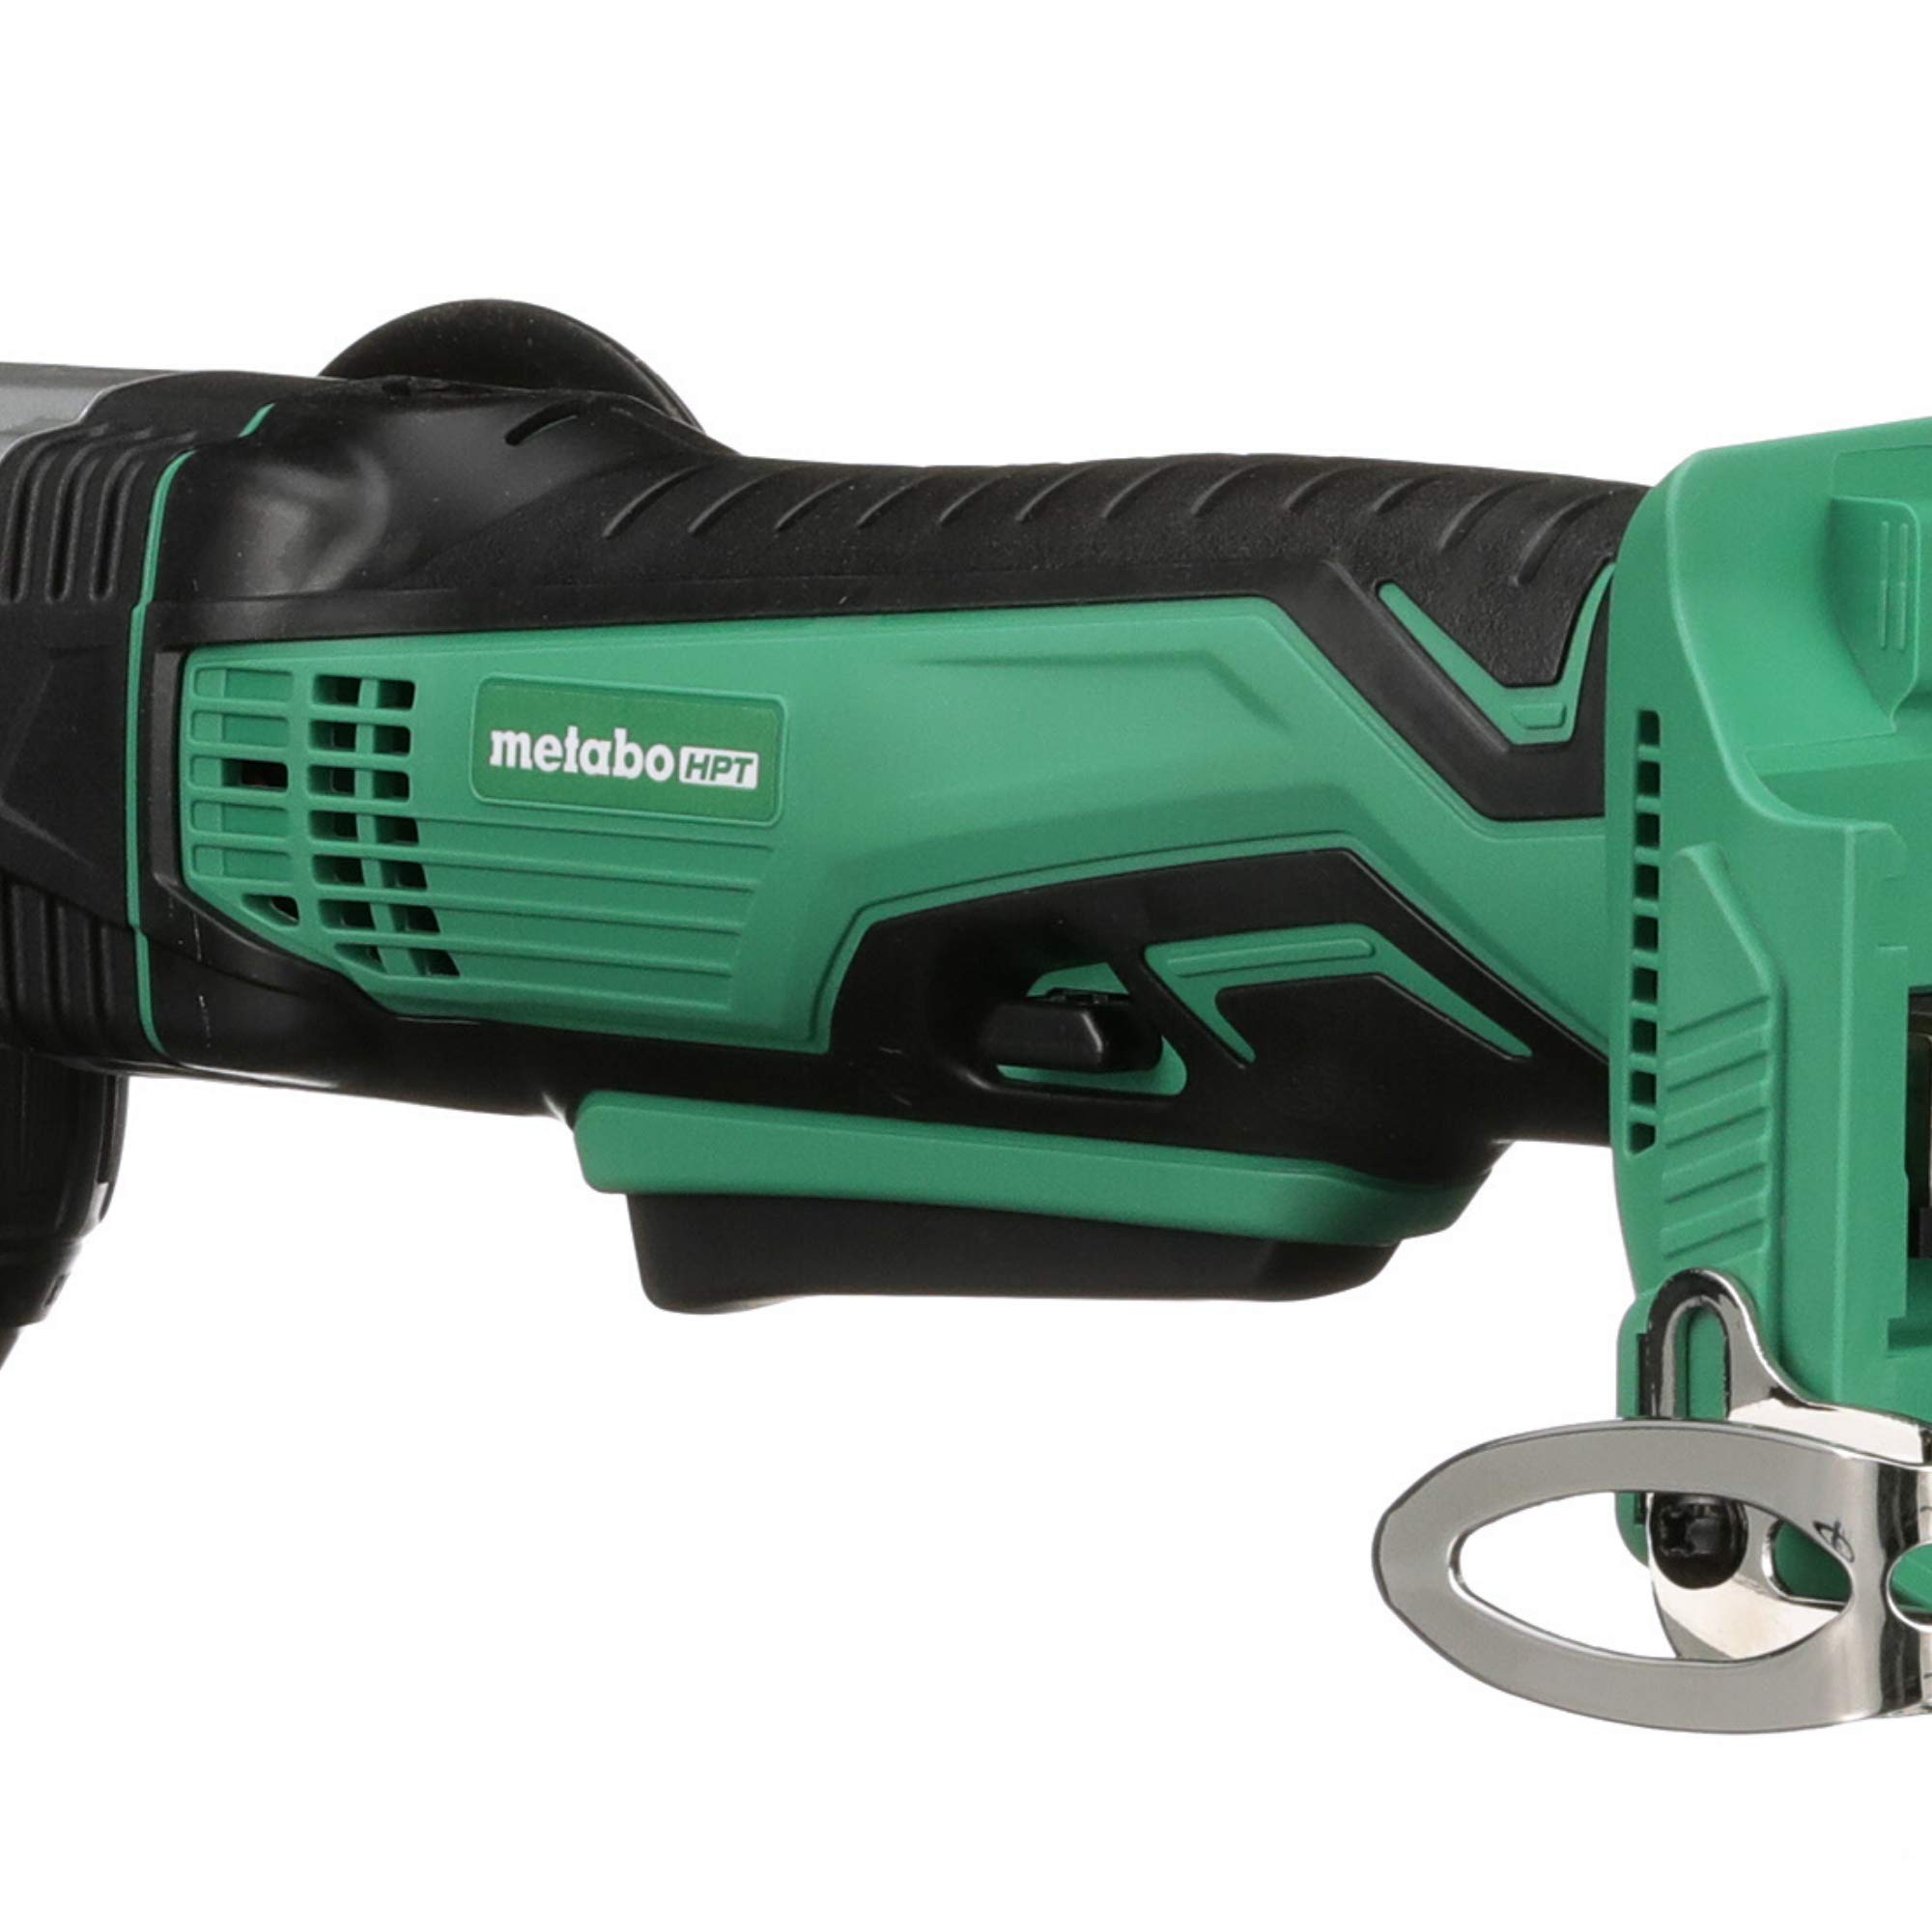 Metabo HPT Right Angle Drill, 18V Cordless, Tool Only - No Battery, 3/8-Inch Keyless Chuck, LED Light, Side Handle (DN18DSLQ4)